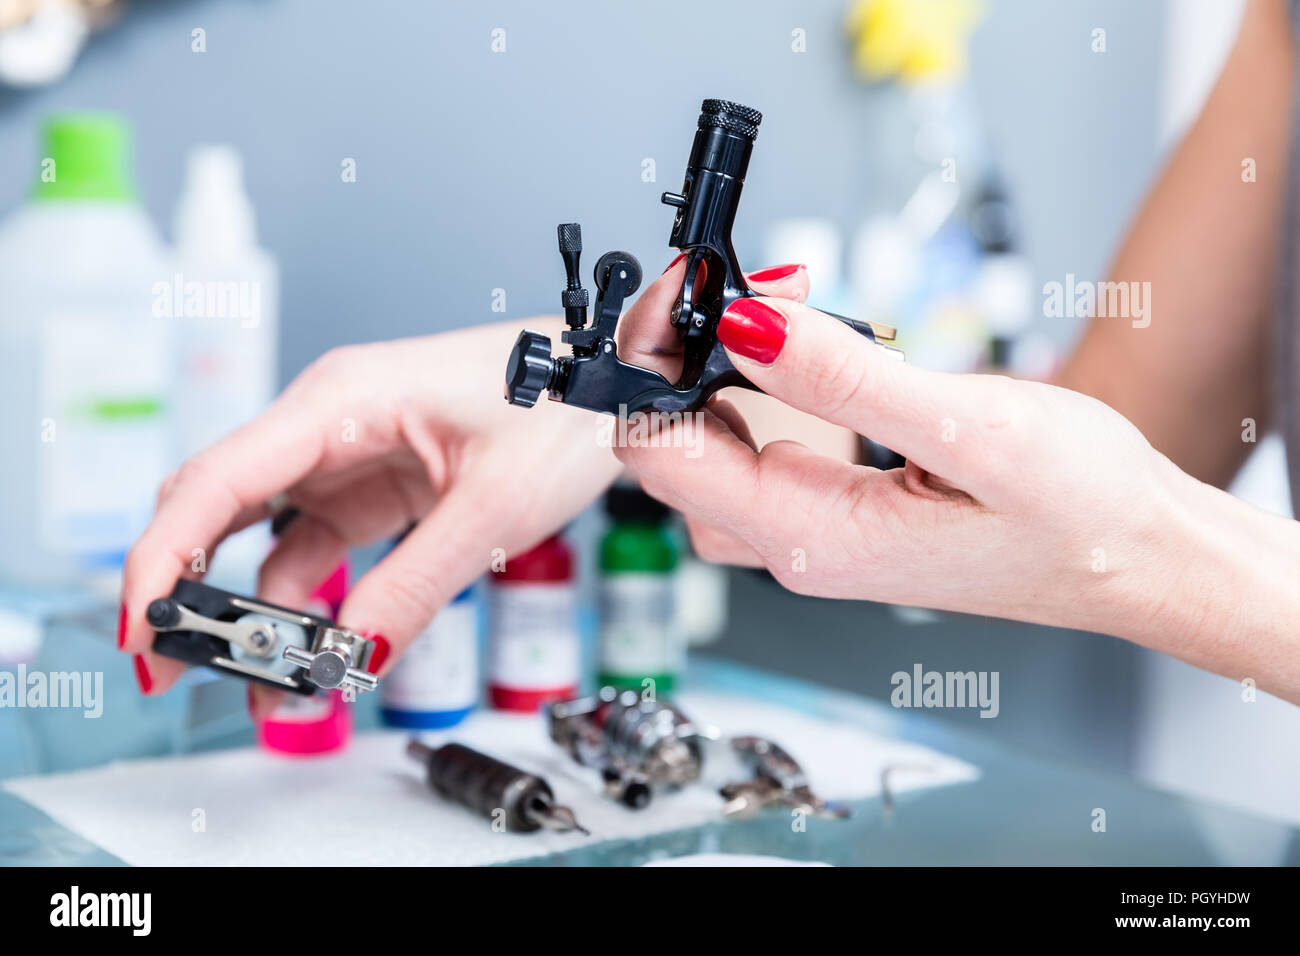 Close-up of the hands of a female artist preparing a professional tattoo machine before tattooing with colored inks in a modern studio Stock Photo